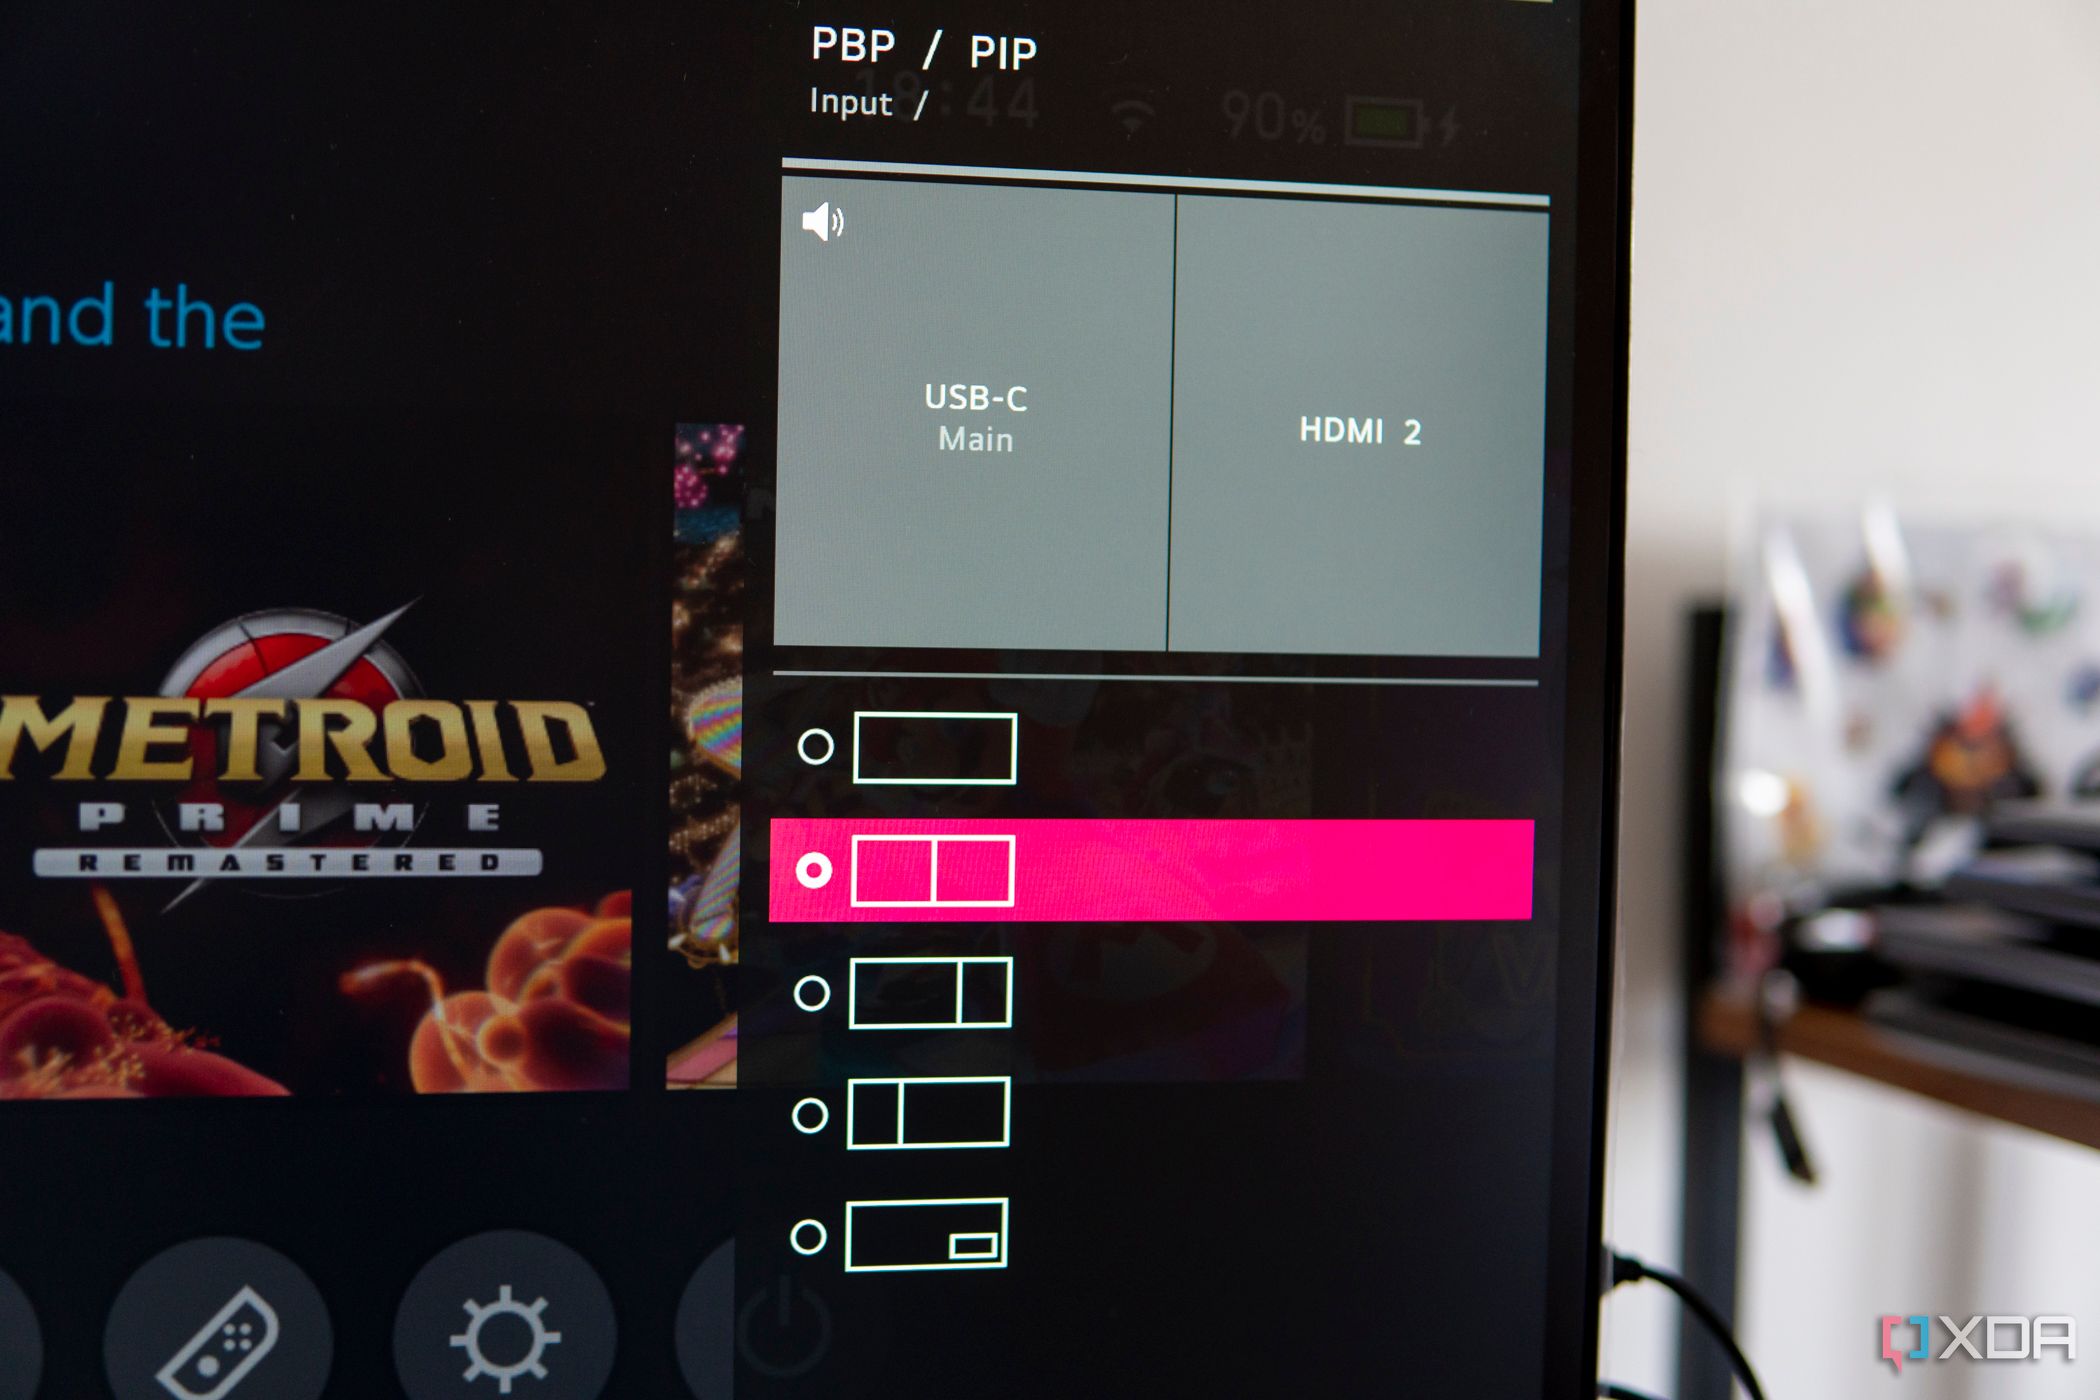 Close-up view of the on-screen display settings on the LG UltraWide 49WQ95C monitor showing multiple picture-by-picture and picture-in-picture modes